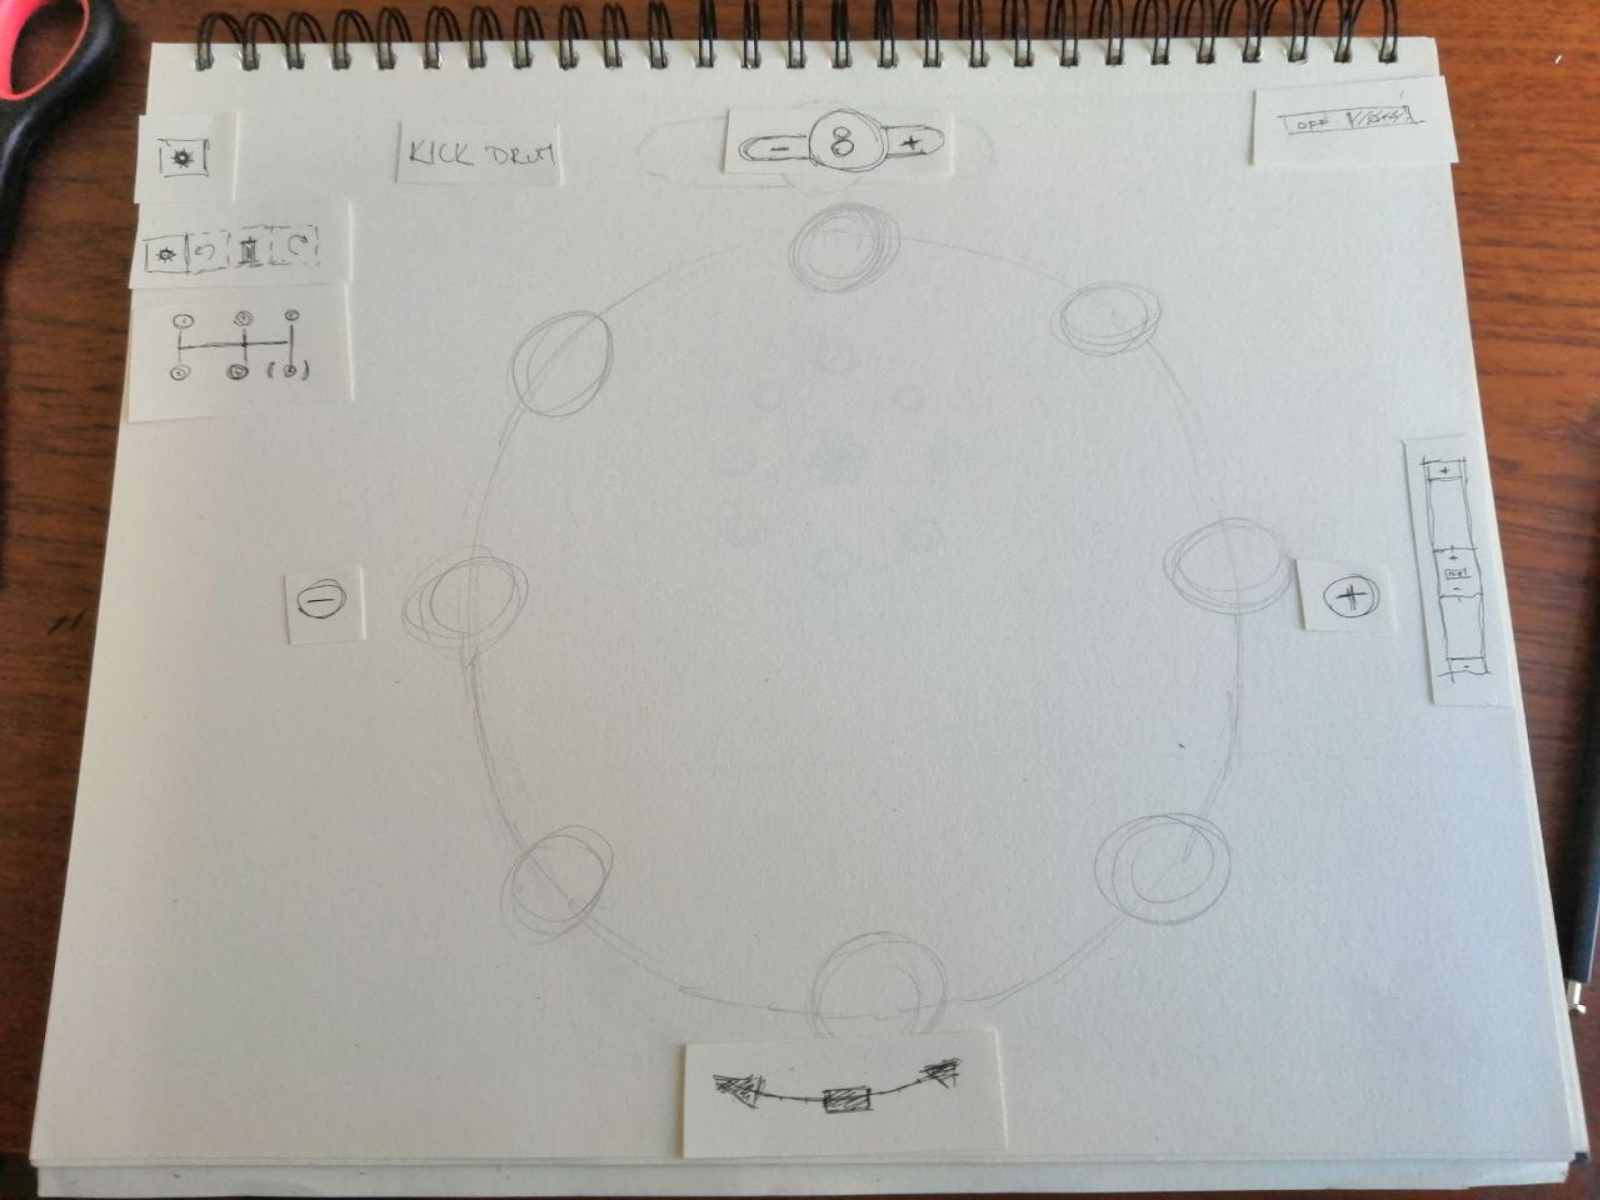 Sketch of initial circle of DuoRhythmo app interface